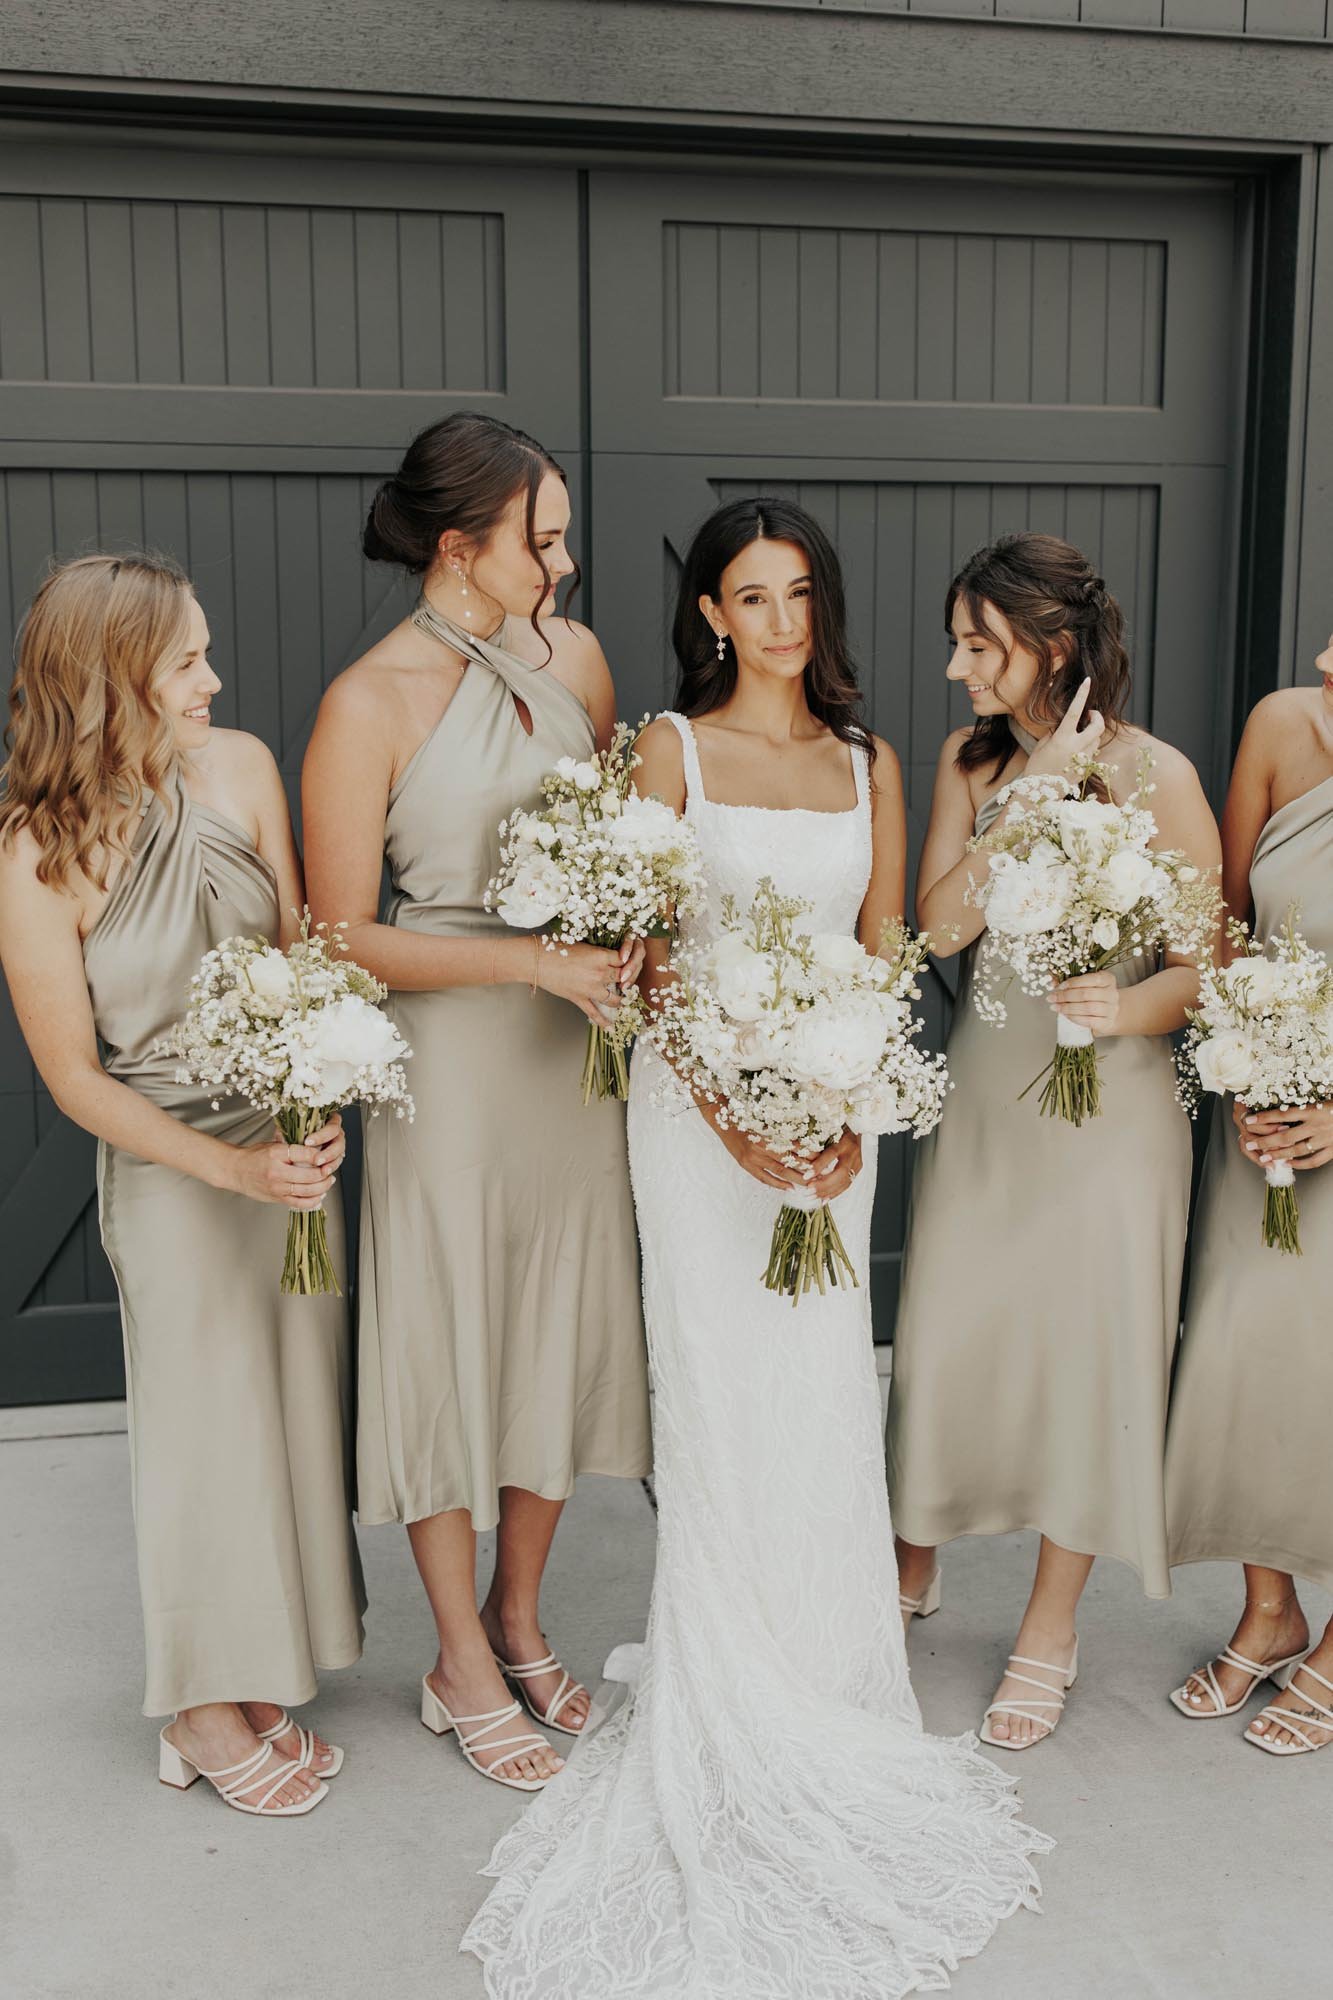  A bridal party wearing champagne satin halter nek bridesmaids dresses surrounding the bride wearing a square neck fitted beaded wedding dress. They are all holding bouquets with white roses, peonies, and babies breath and standing in front of a blac